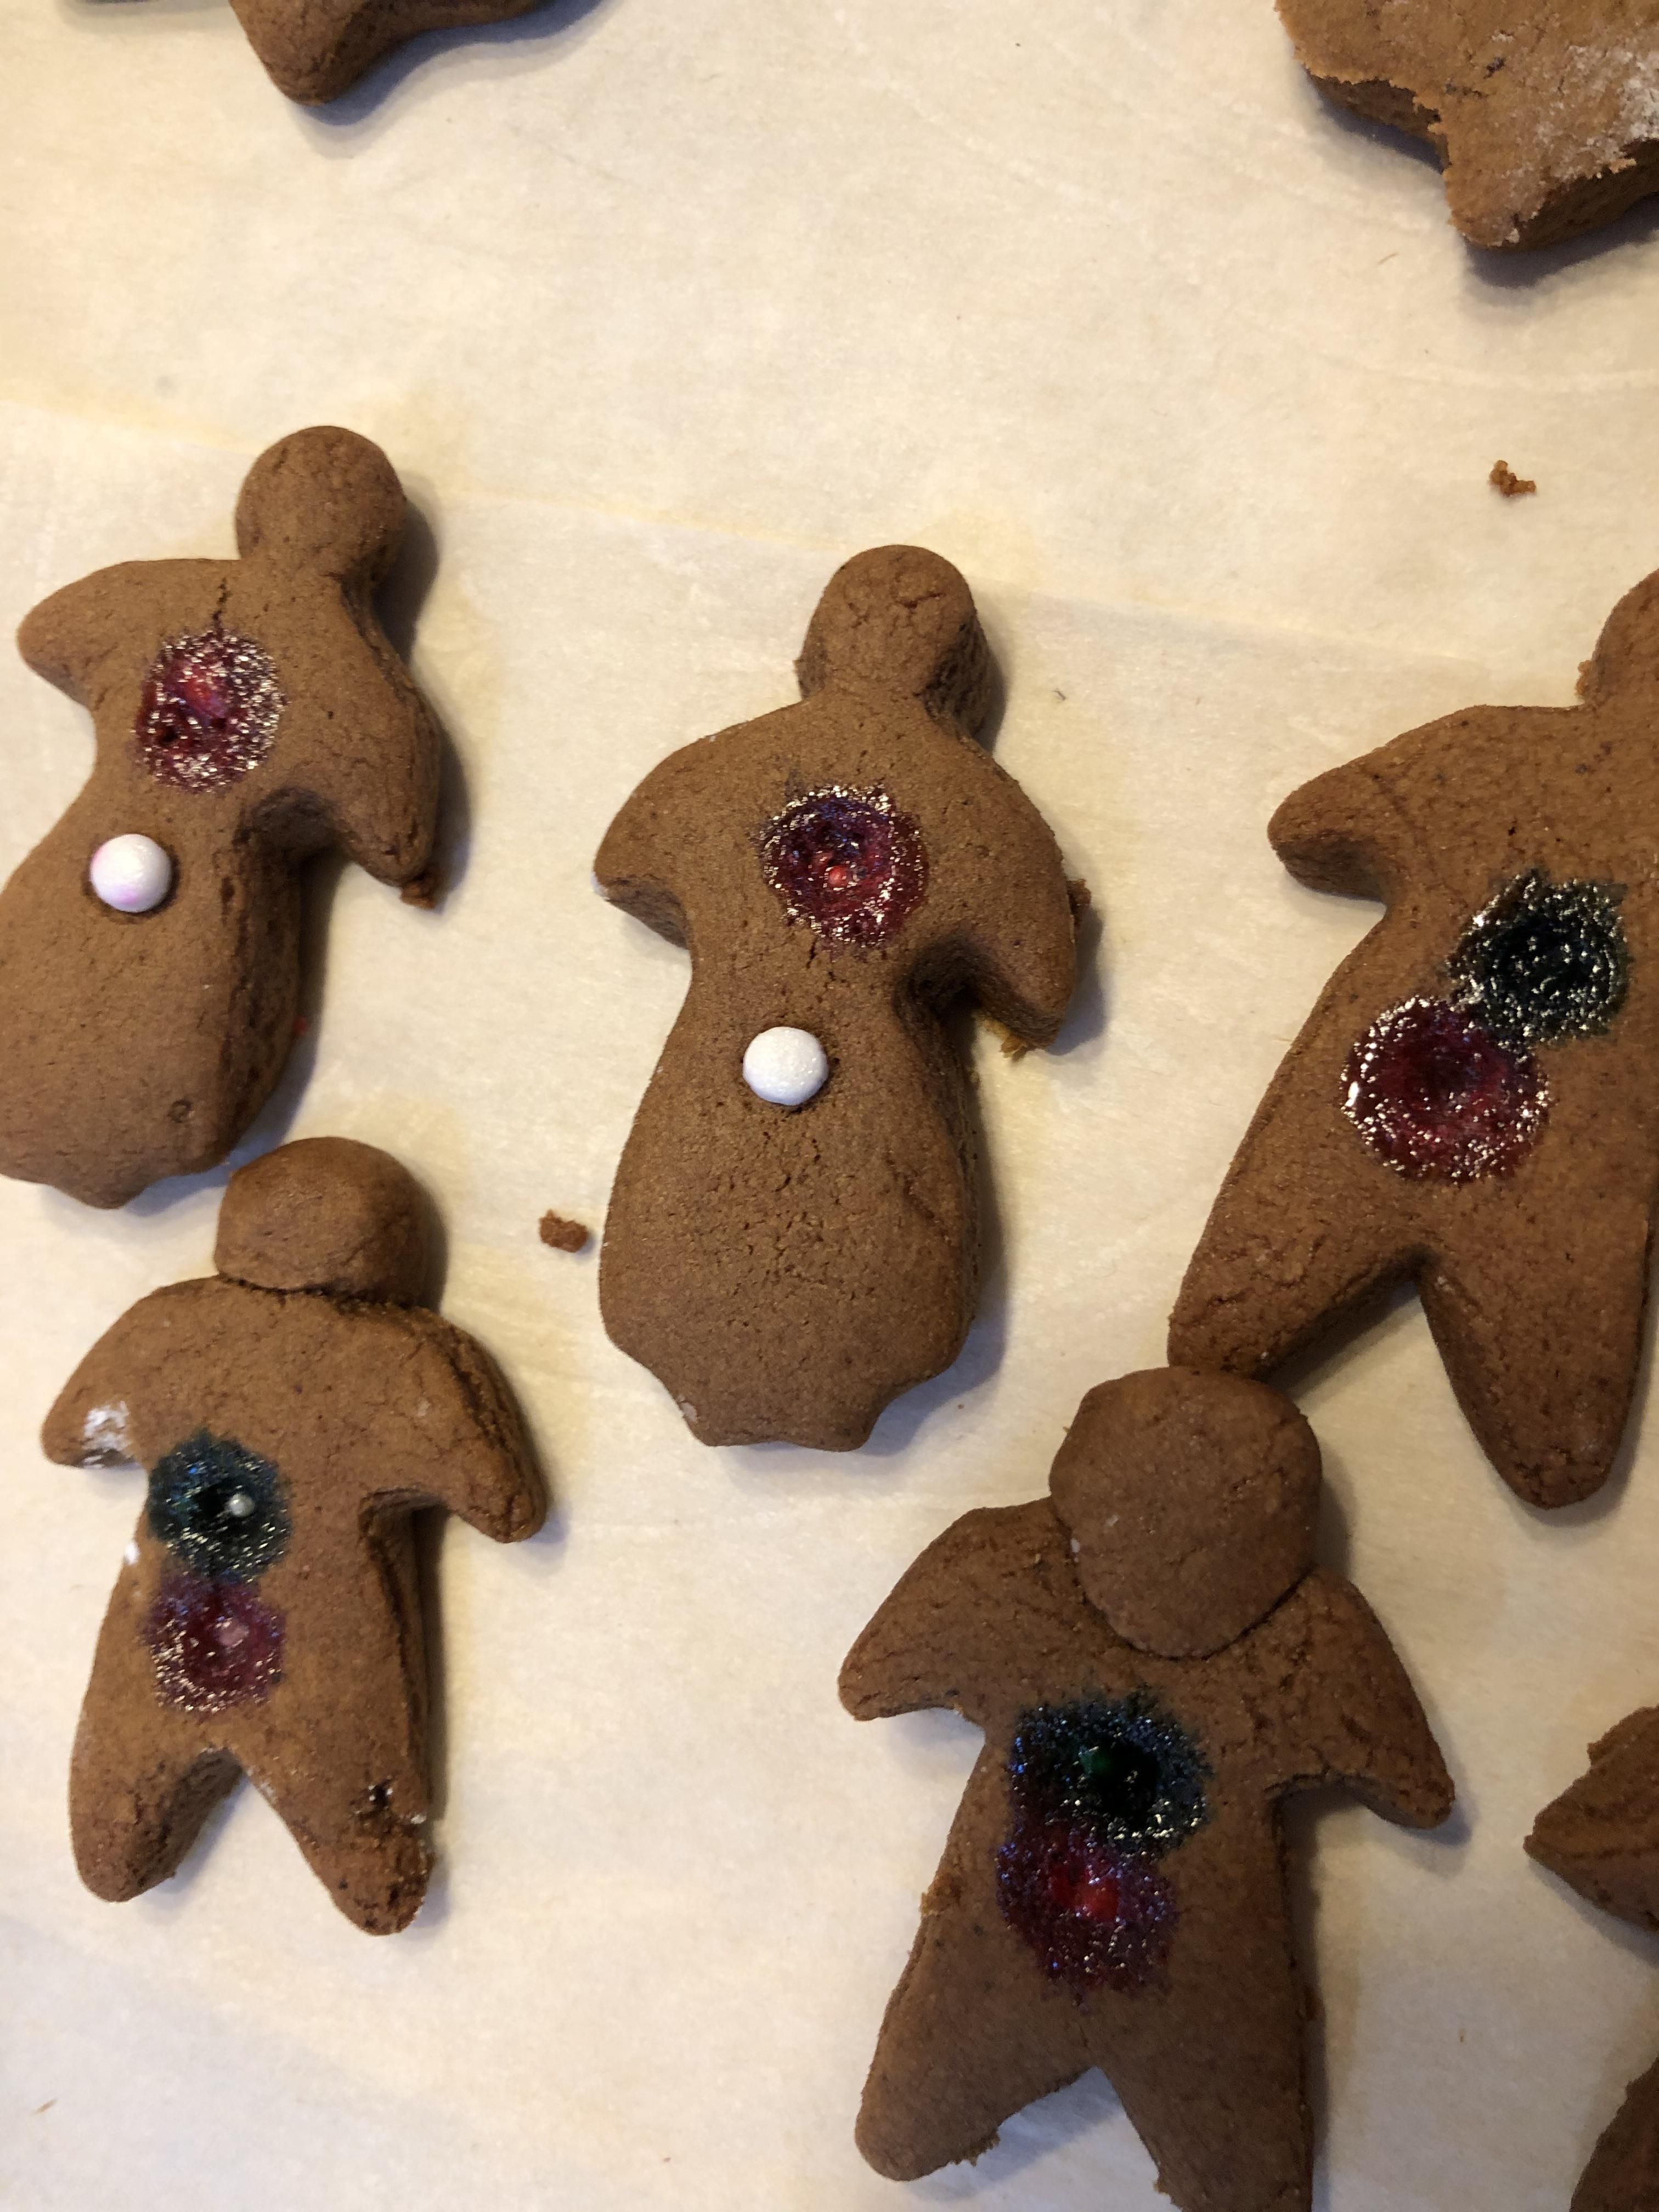 My girlfriend made gingerbread people and put the sprinkles on too soon and they melted. Now it looks like they got shot.